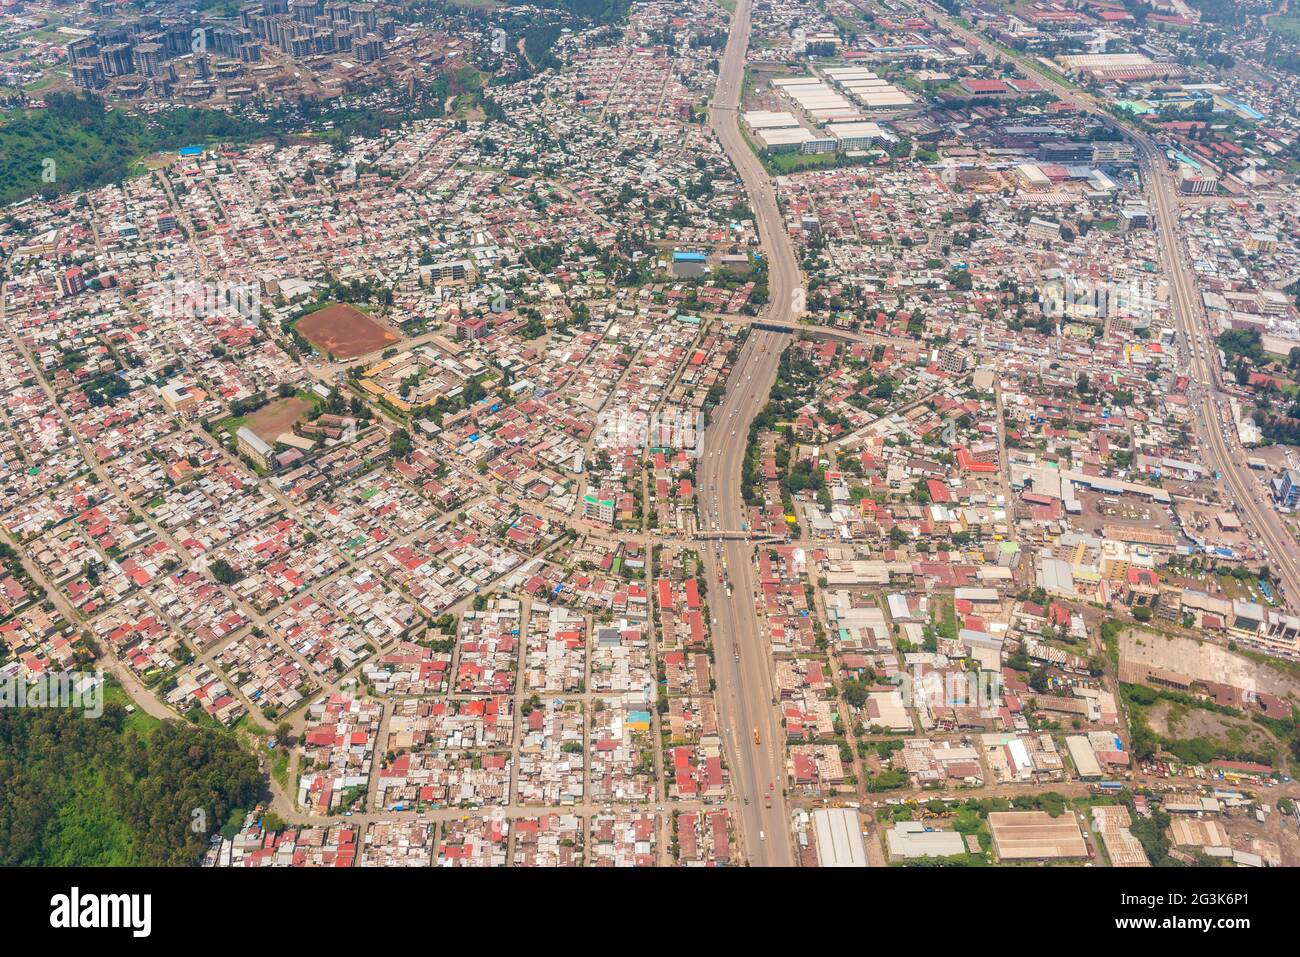 Aerial view of the Addis Ababa Stock Photo